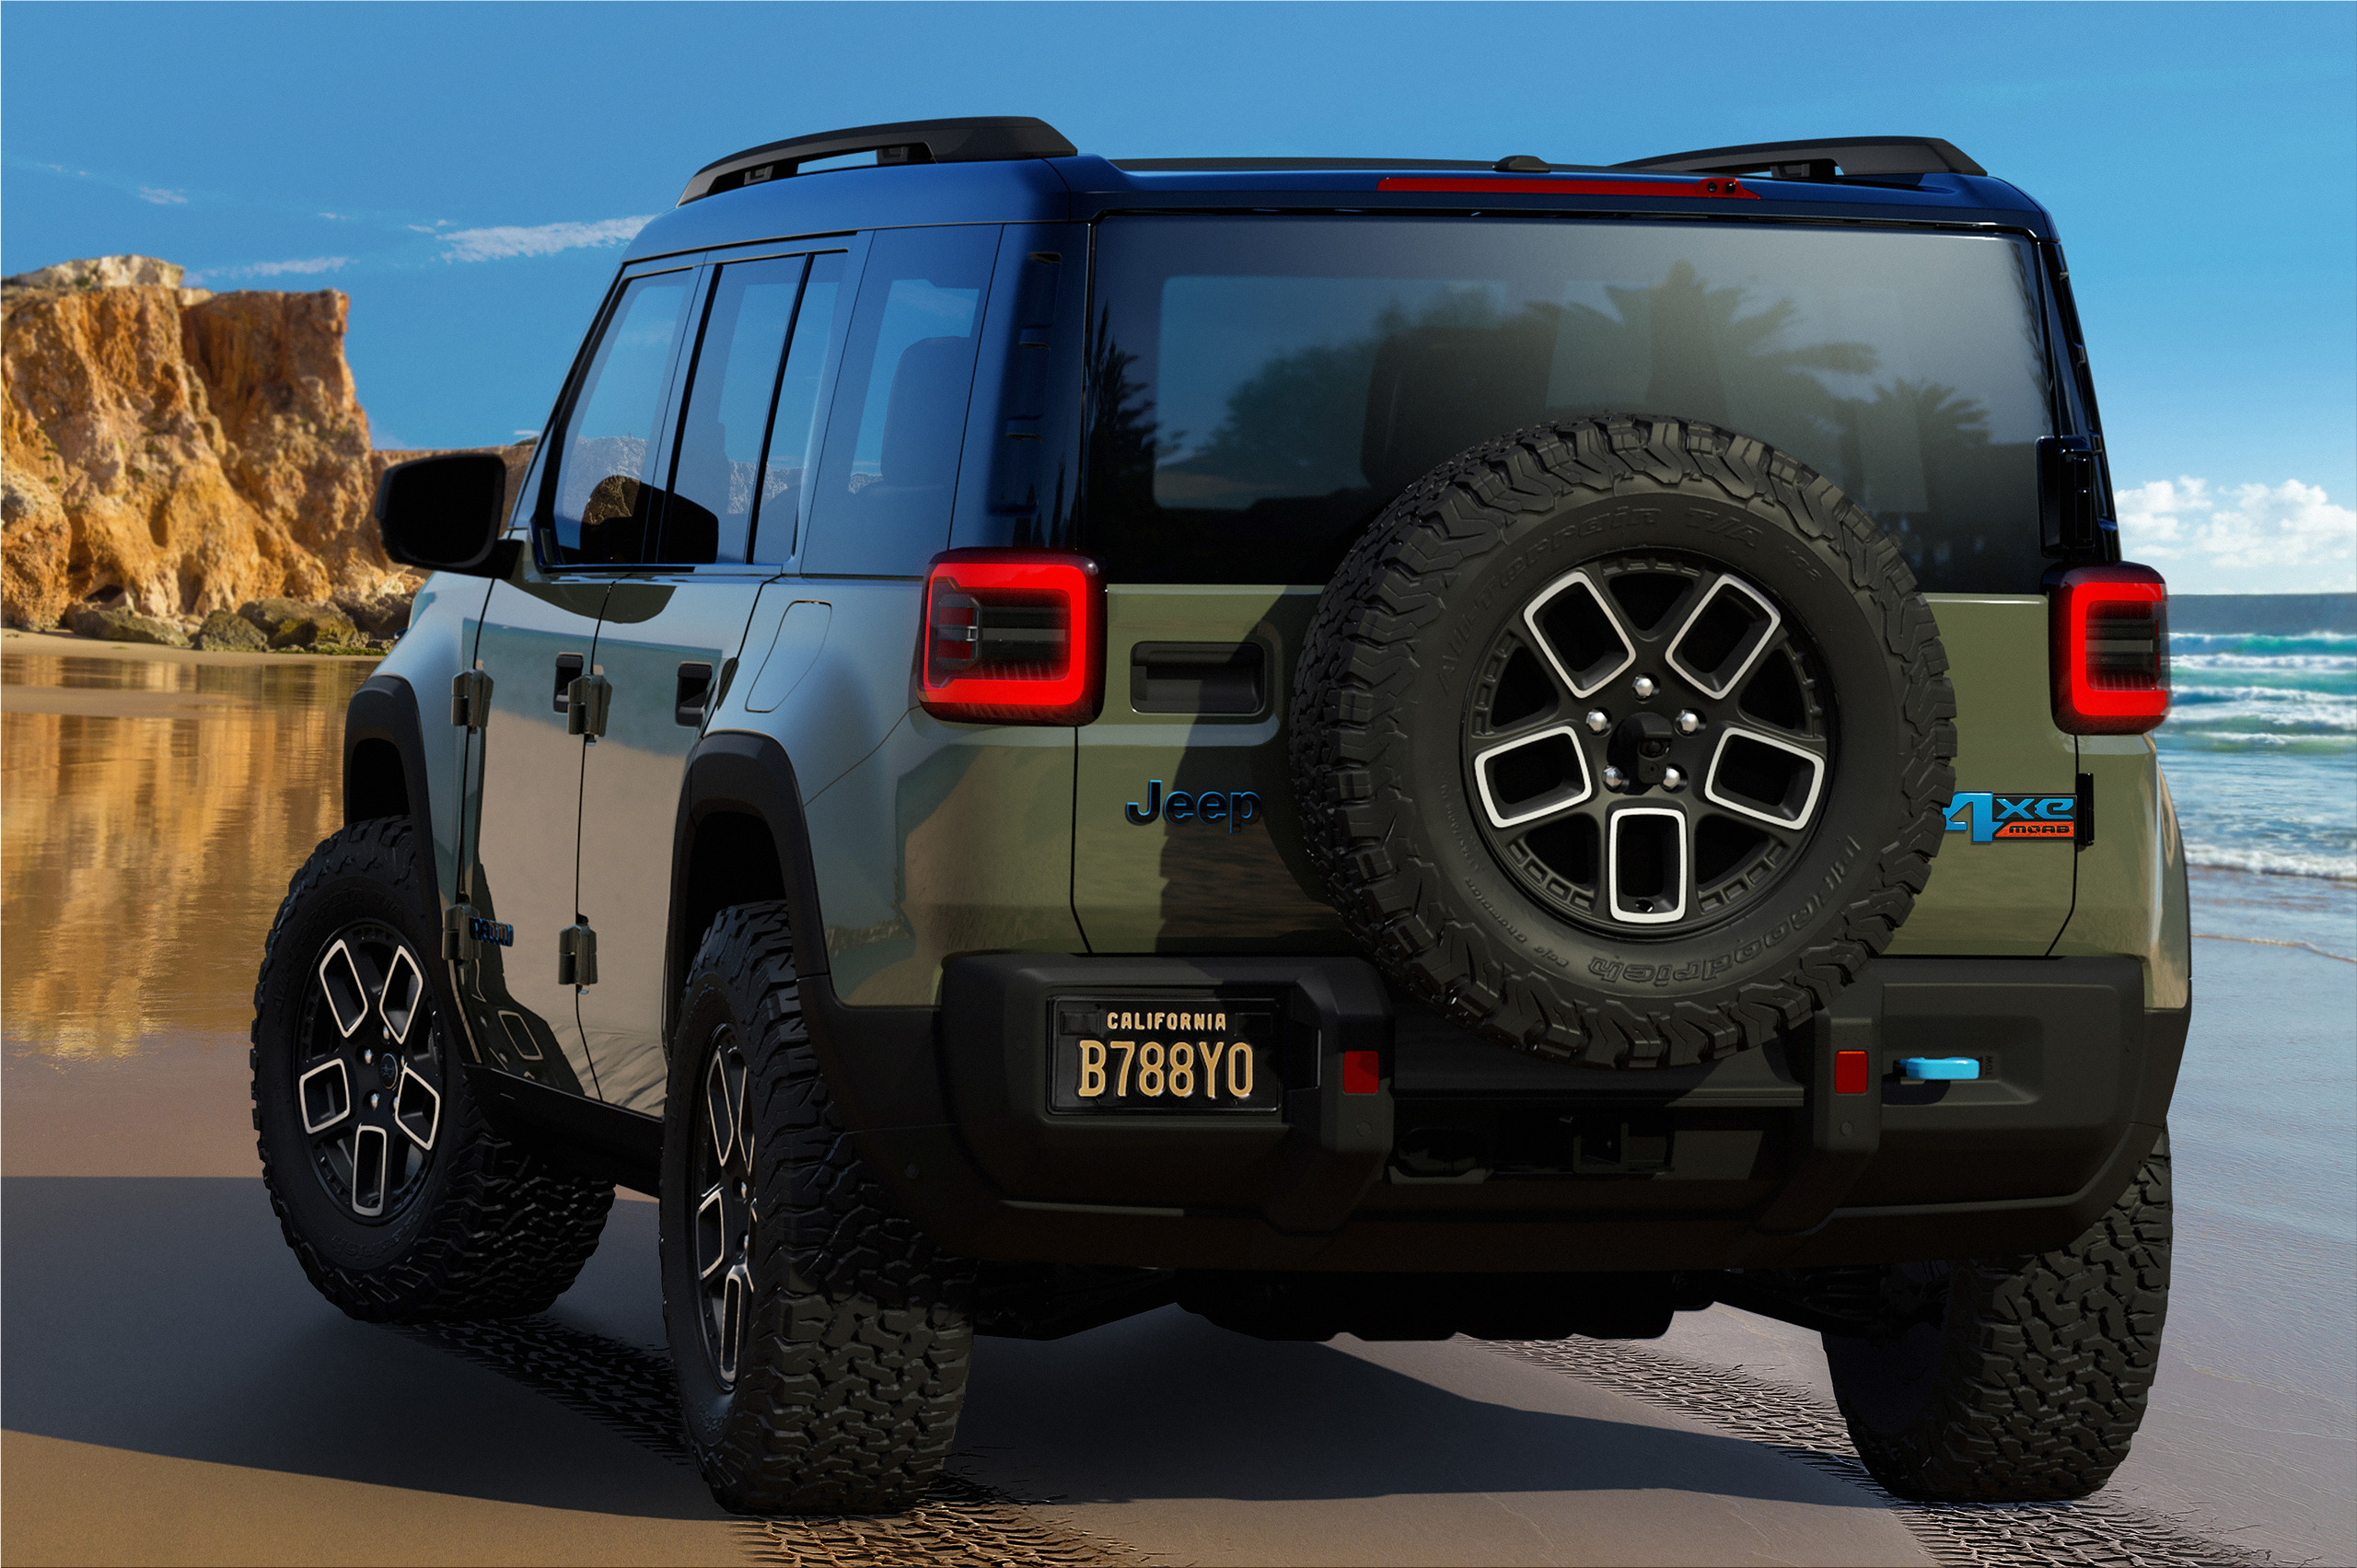 The new Jeep Avenger electric SUV arrives in 2023